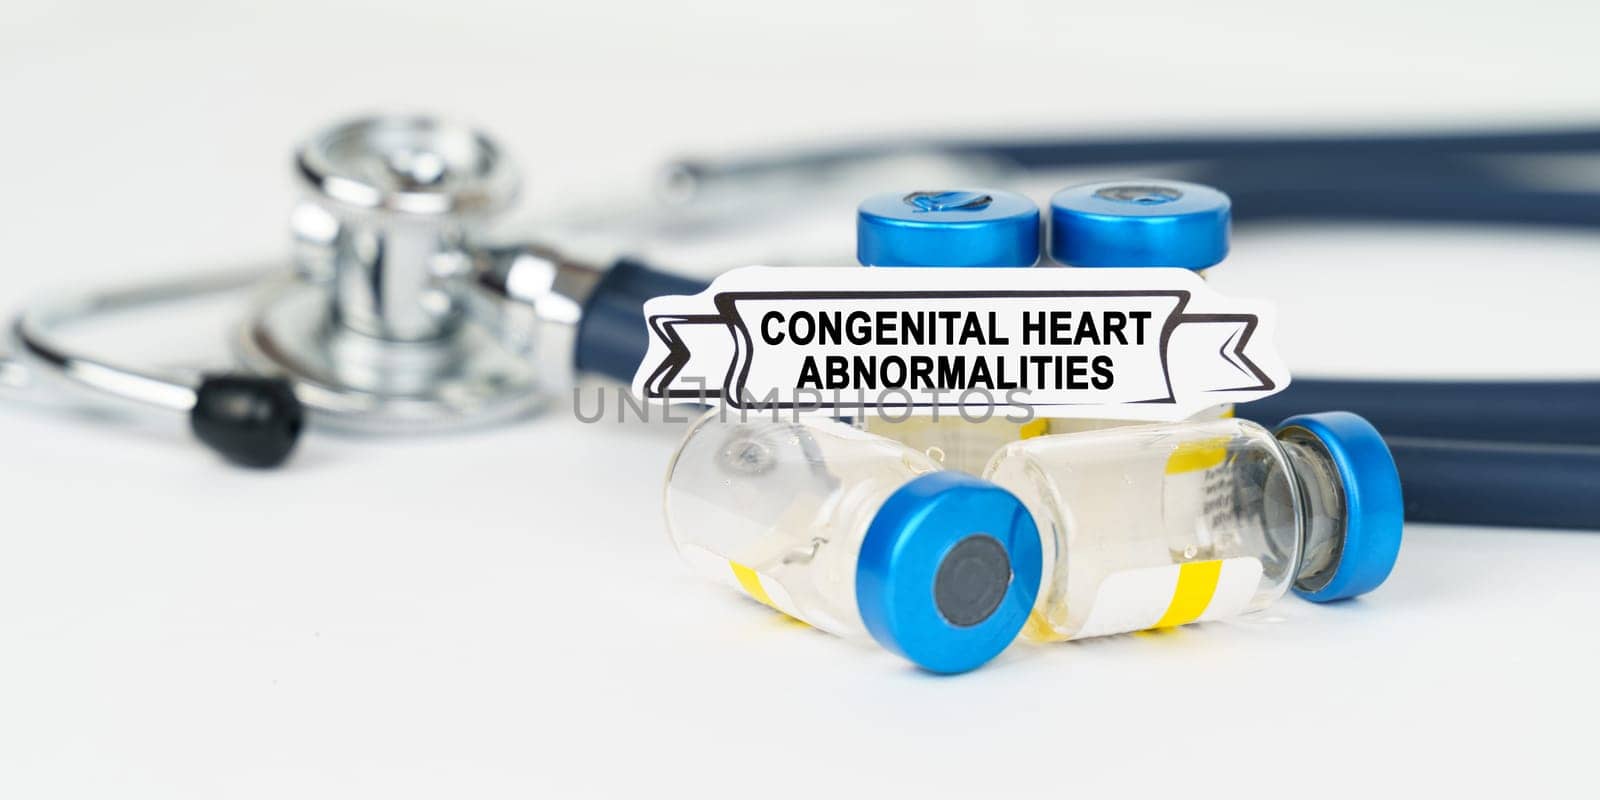 On the table there is a stethoscope, injections and a sign with the inscription - congenital heart abnormalities by Sd28DimoN_1976